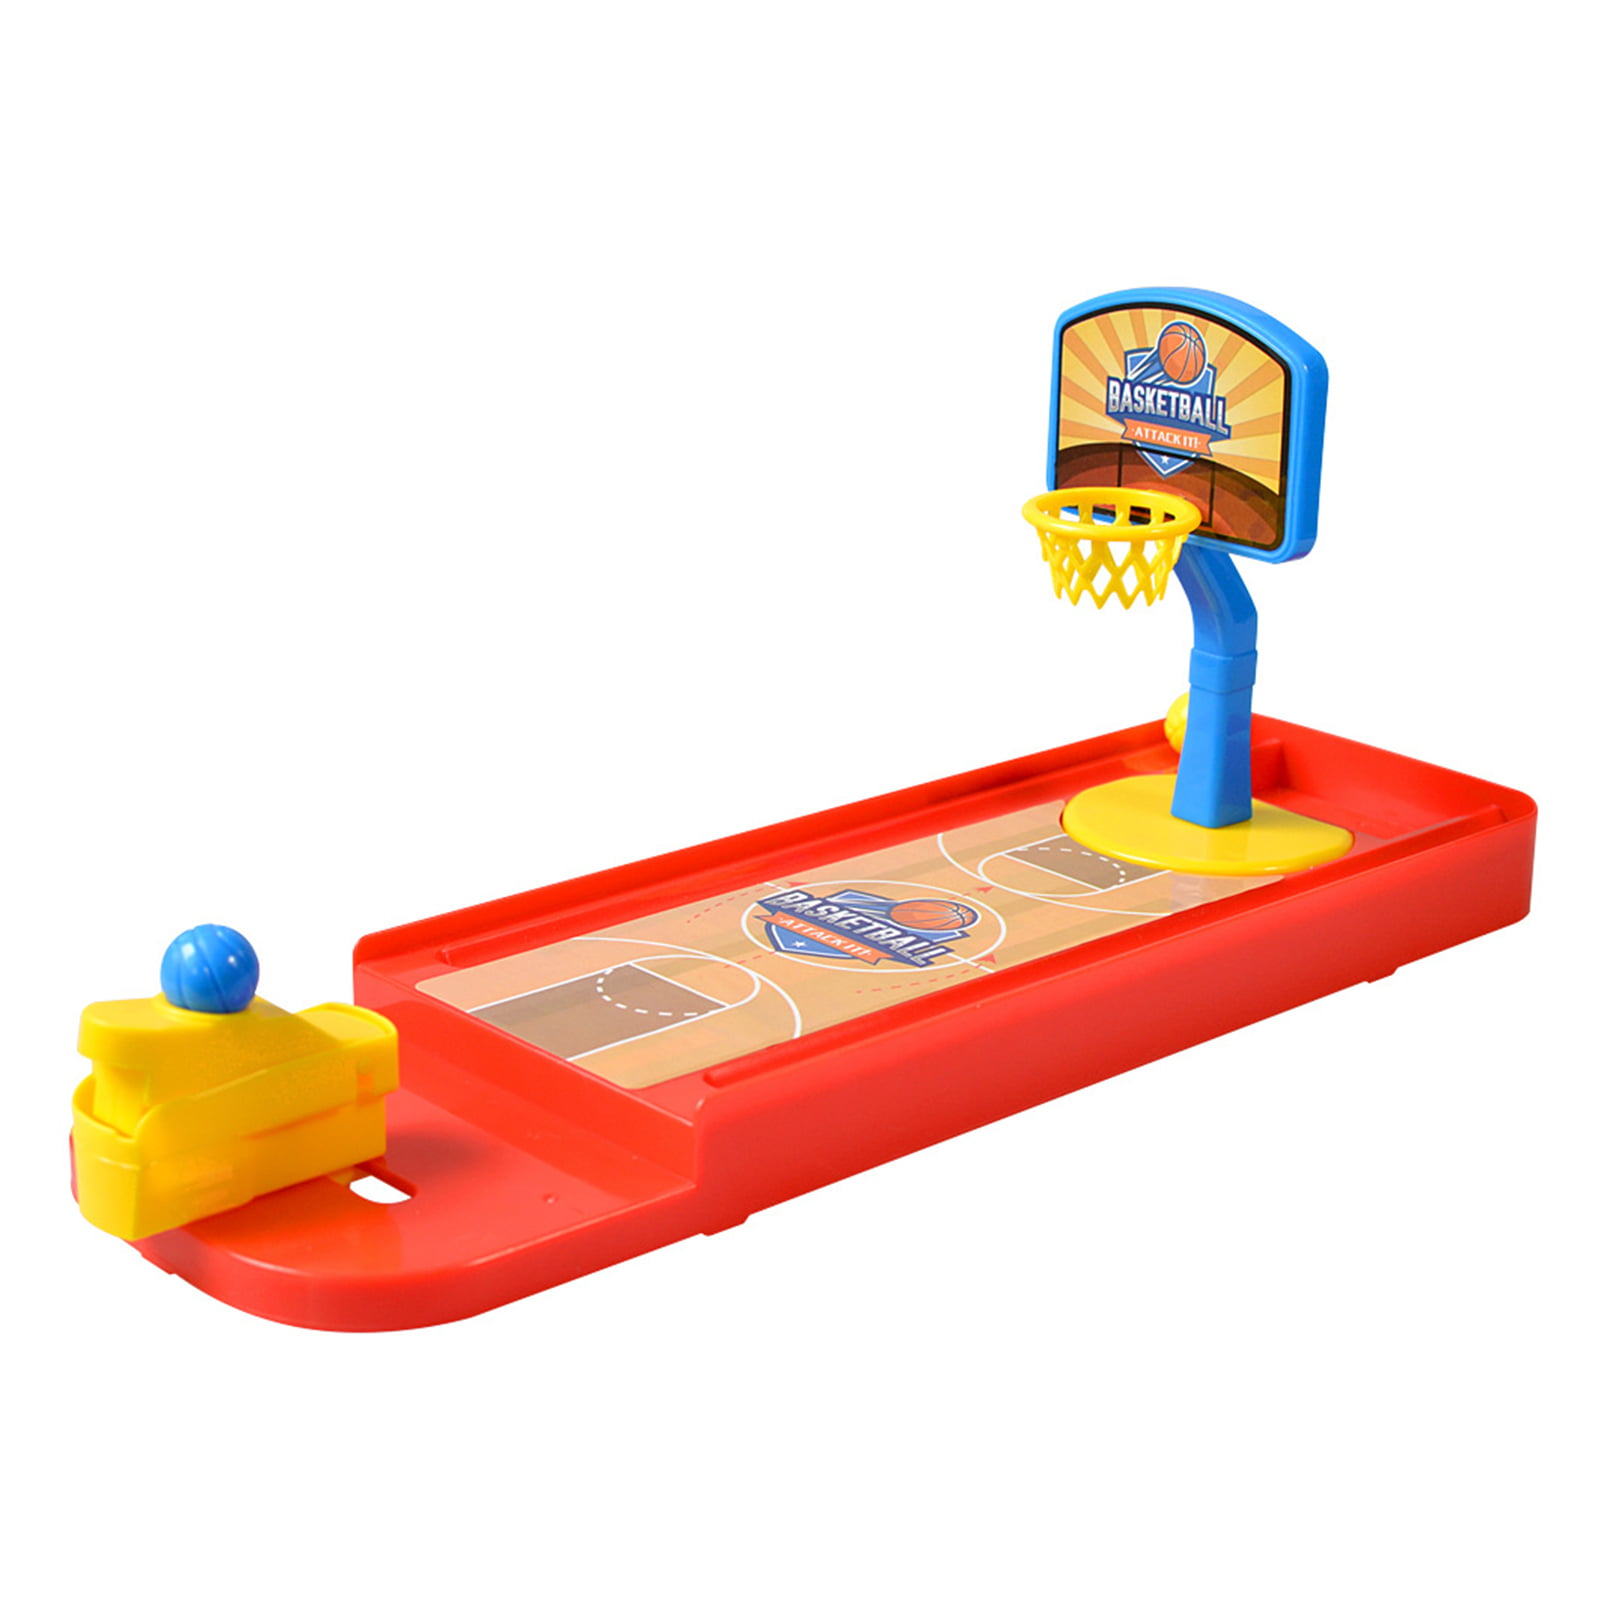 Great for Children Built in Precision Launchers Mini Basketball Shooting Game Pinball Toy Play Indoors On Tabletop Or Desk Shootout Hoops Toy Basketball Set 